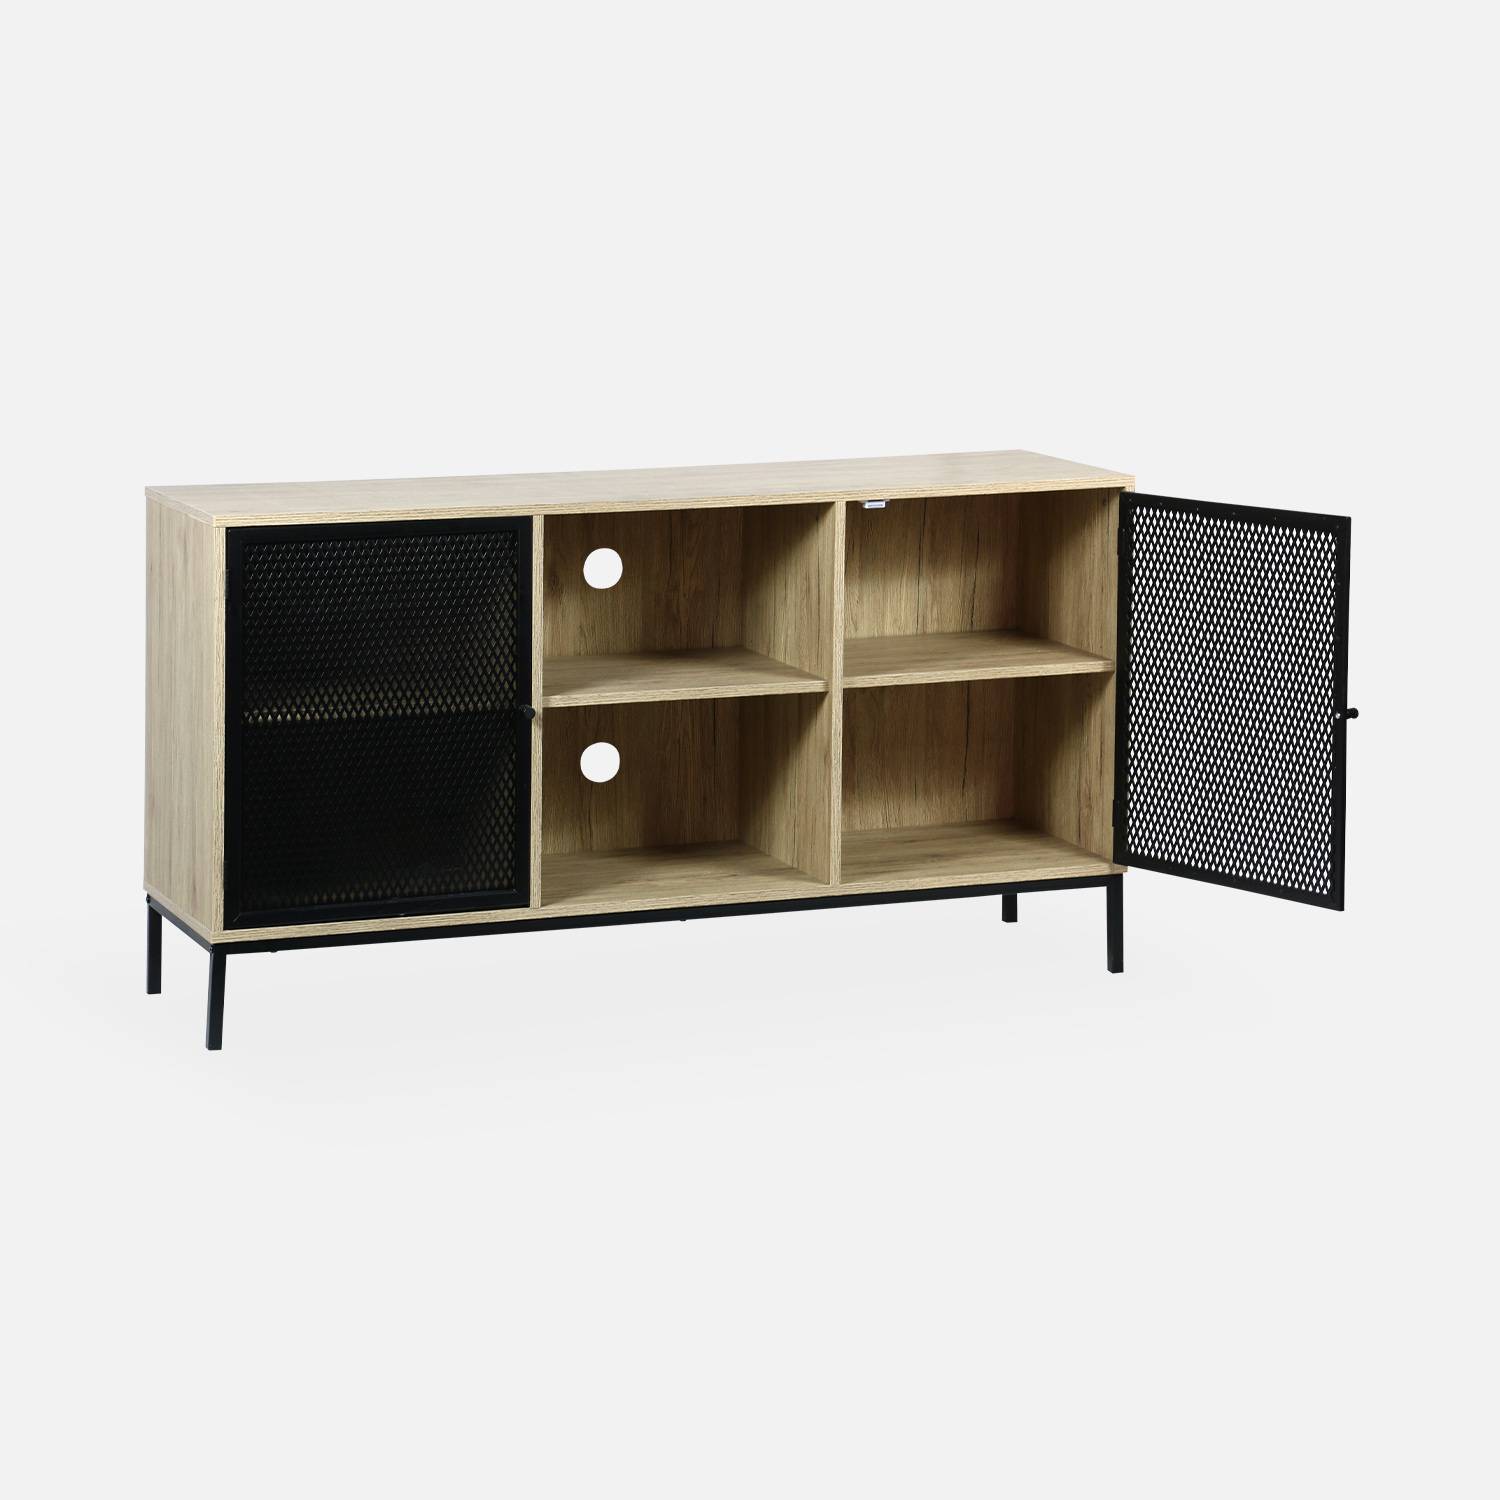 TV stand - metal and wood-effect - 2 doors and 6 compartments - Brooklyn,sweeek,Photo5